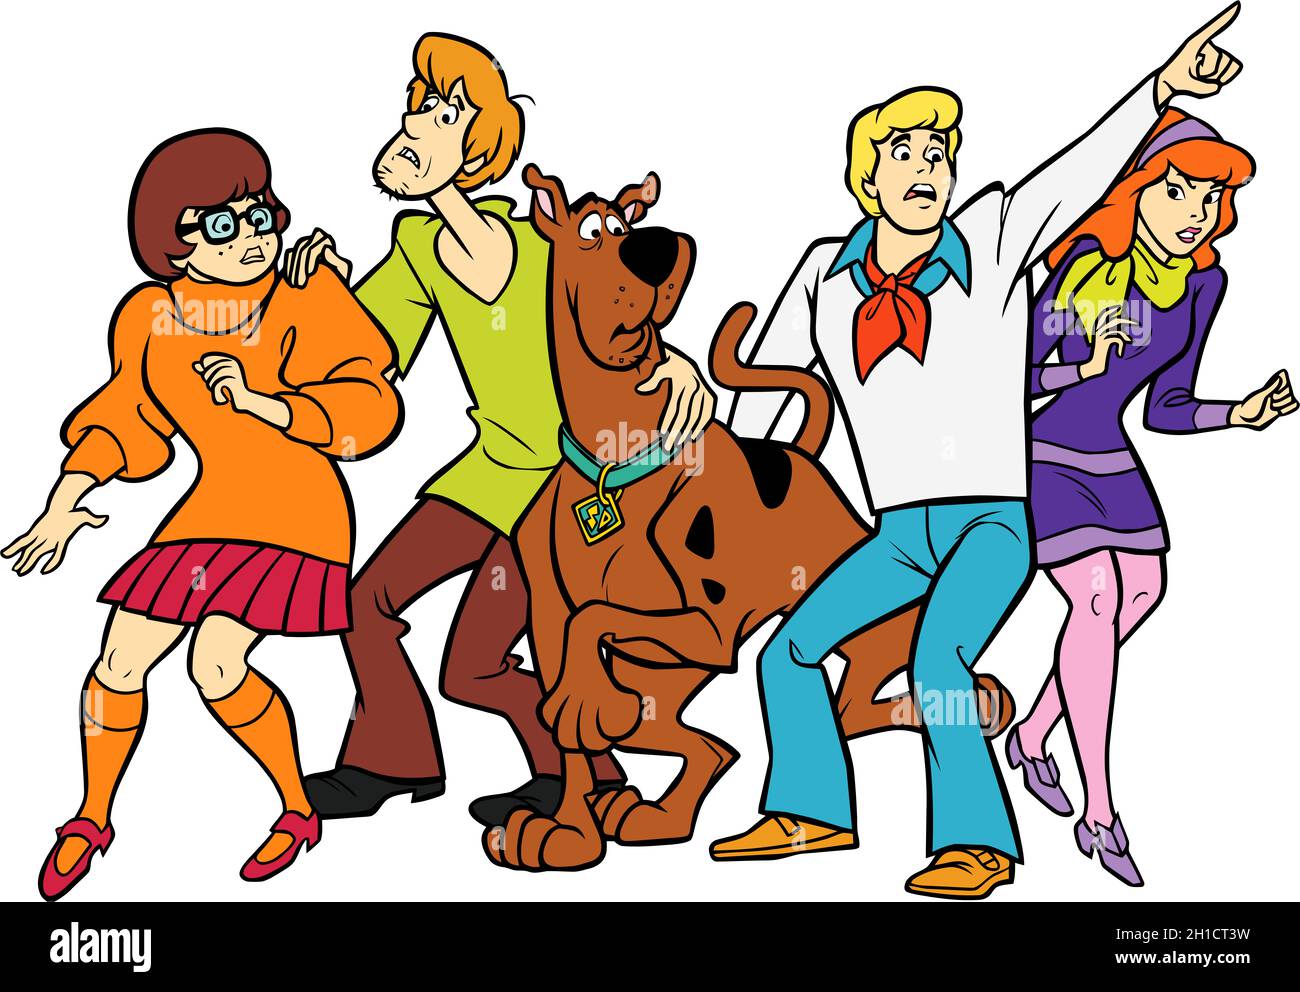 Scooby doo cartoon Cut Out Stock Images & Pictures - Alamy